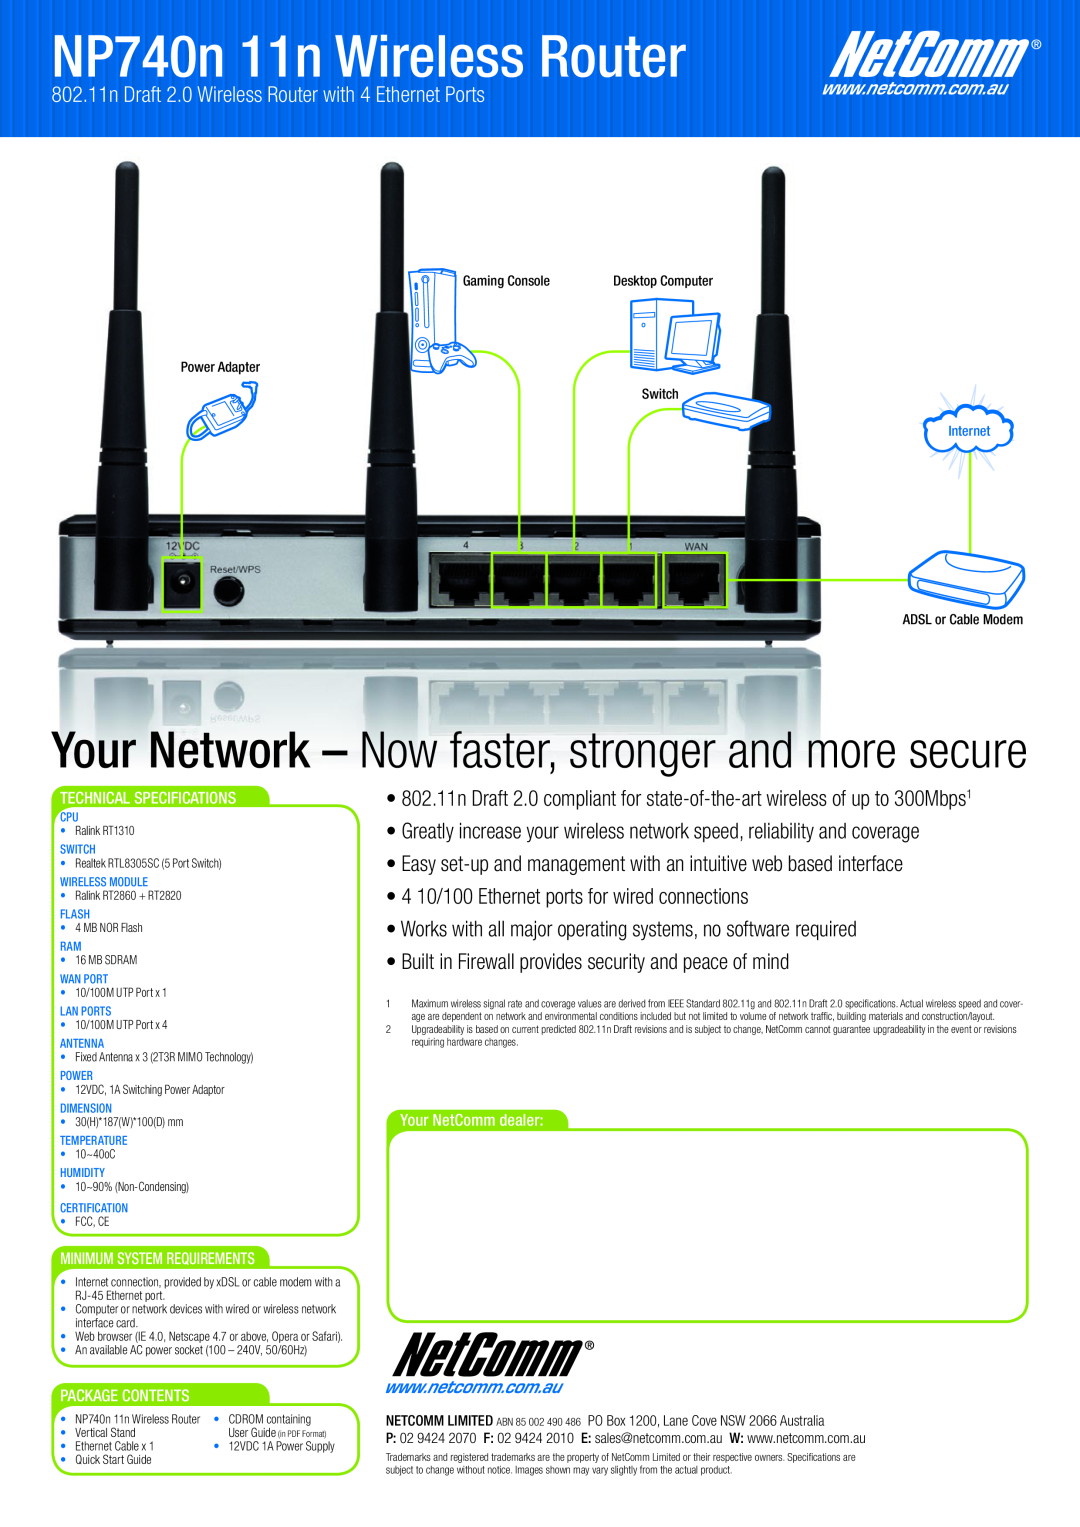 NetComm 802.11n Draft 2.0 Wireless Router with 4 Ethernet Ports, NP740n 11n Wireless Router, Technical Specifications 